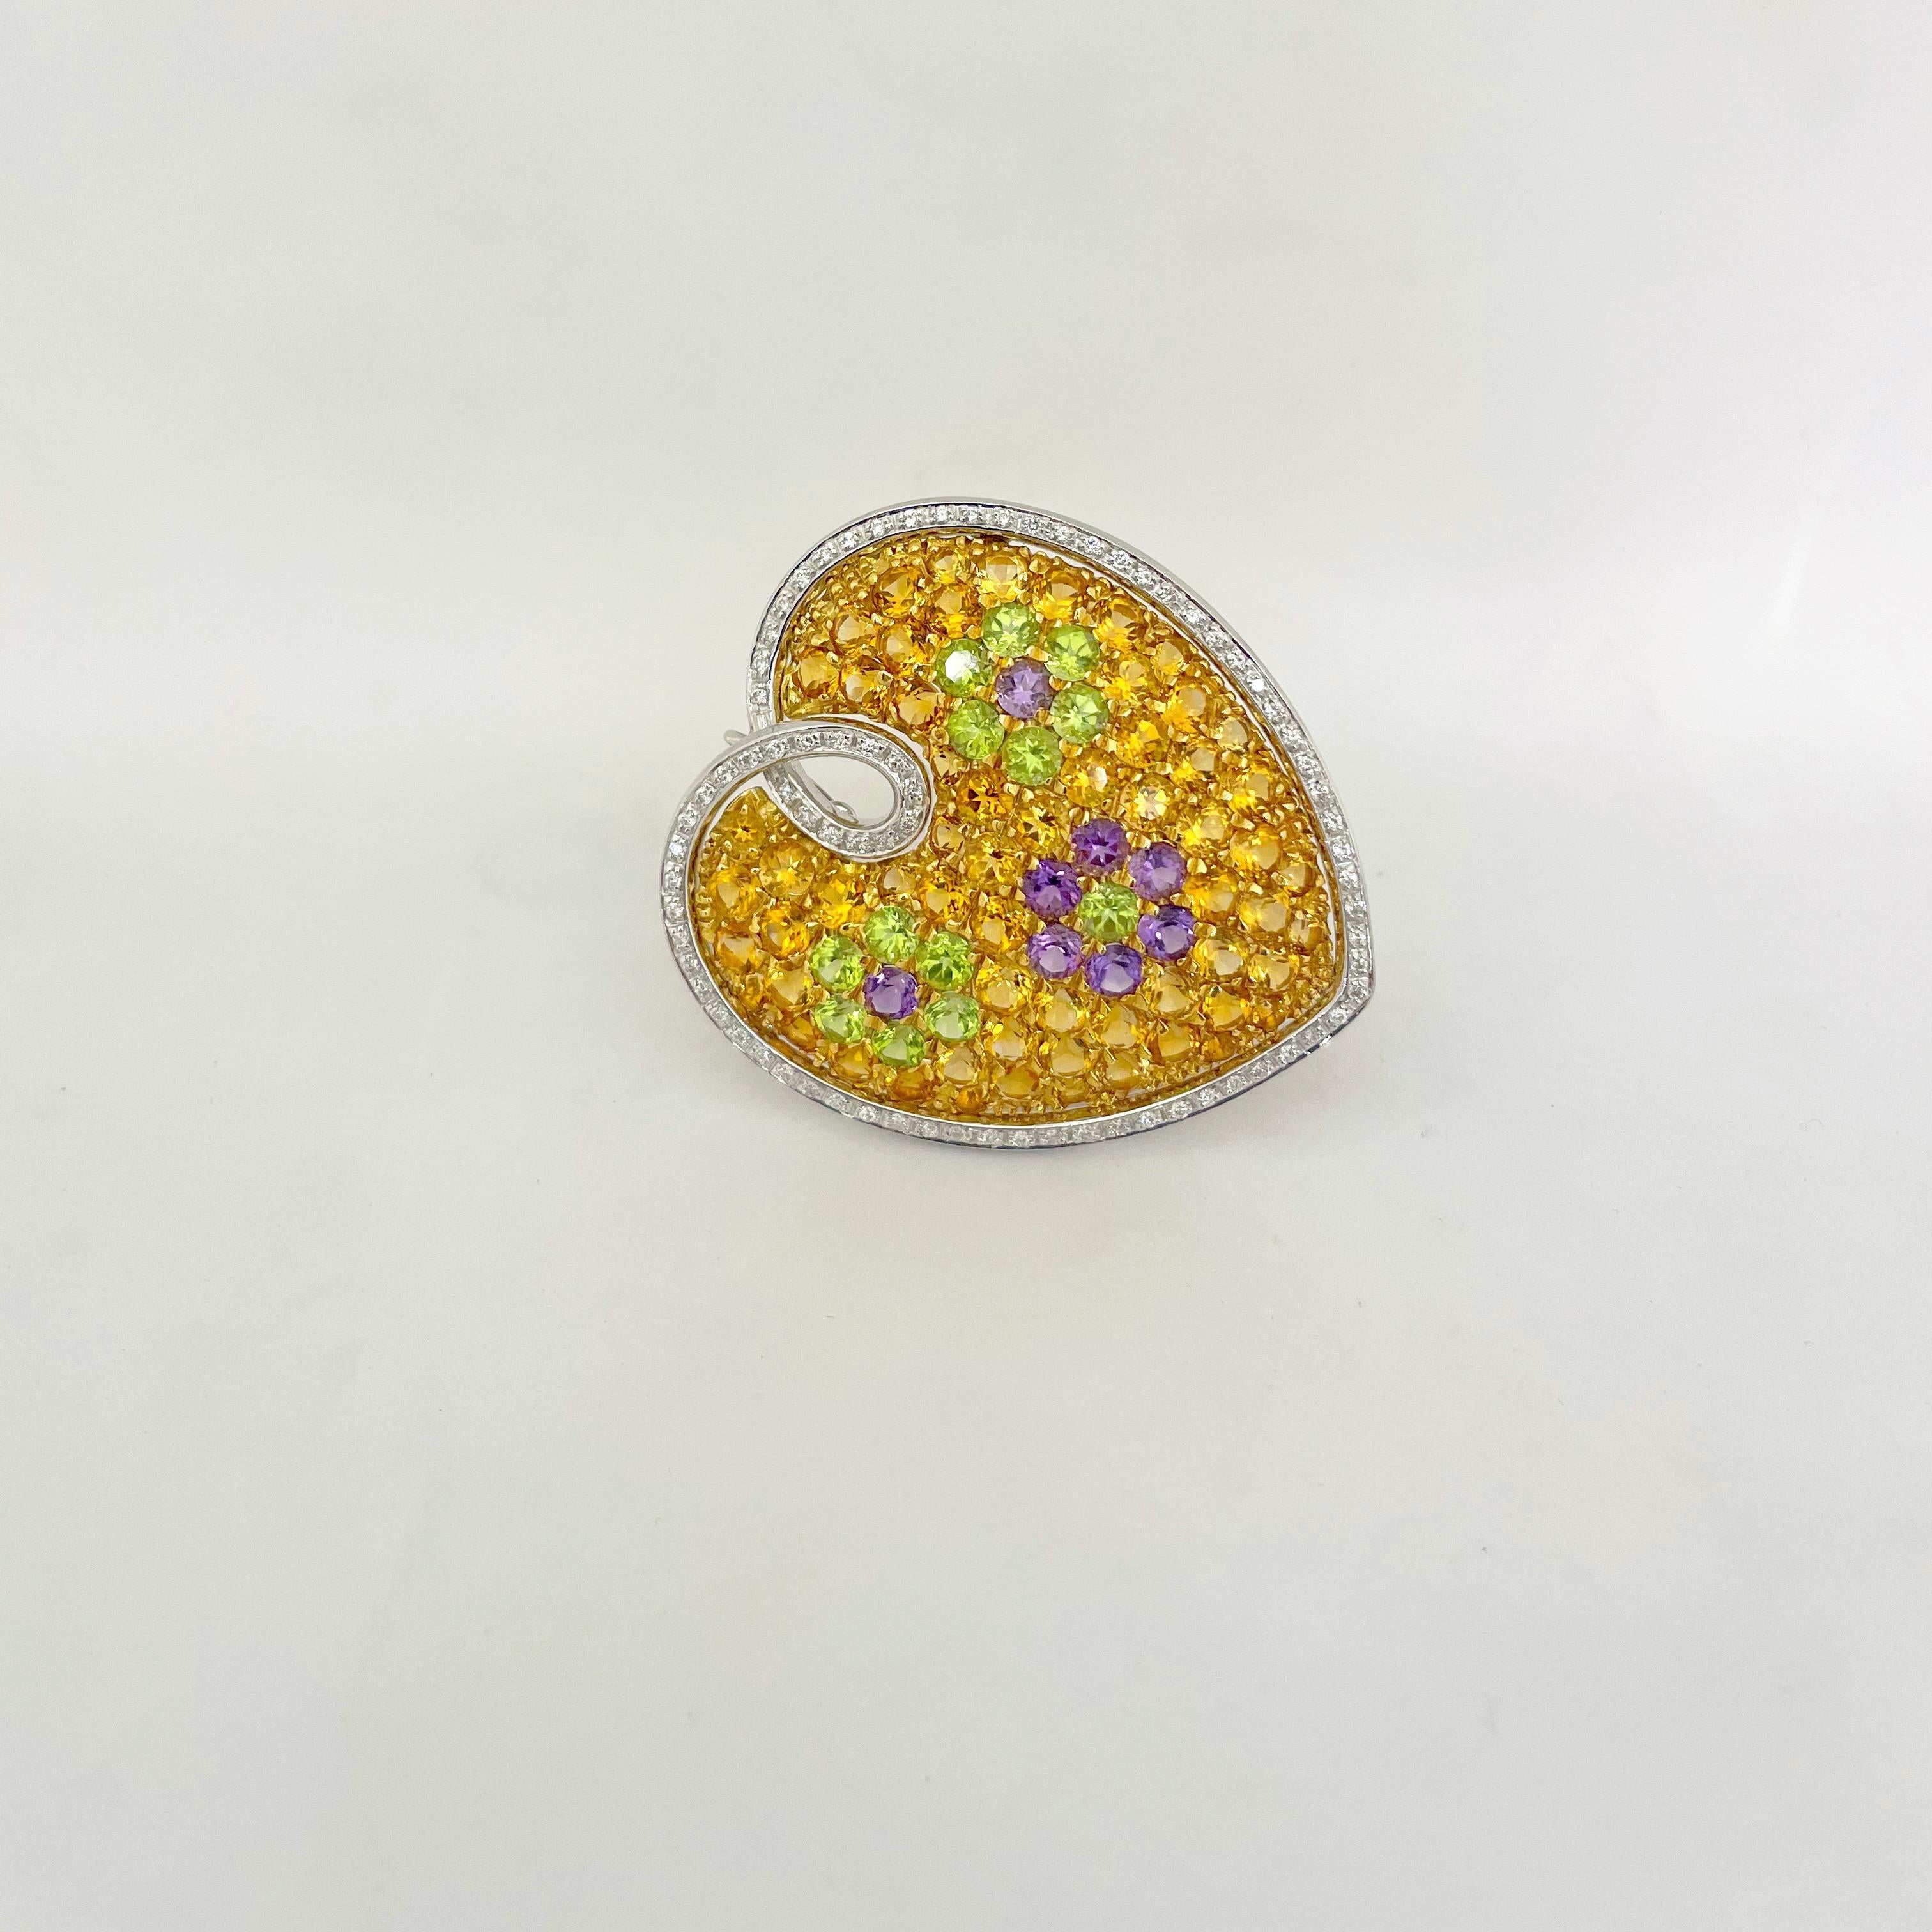 Modern 18KT Yellow and White Gold Semi-Precious Stone Puffed Heart Brooch with Diamonds For Sale